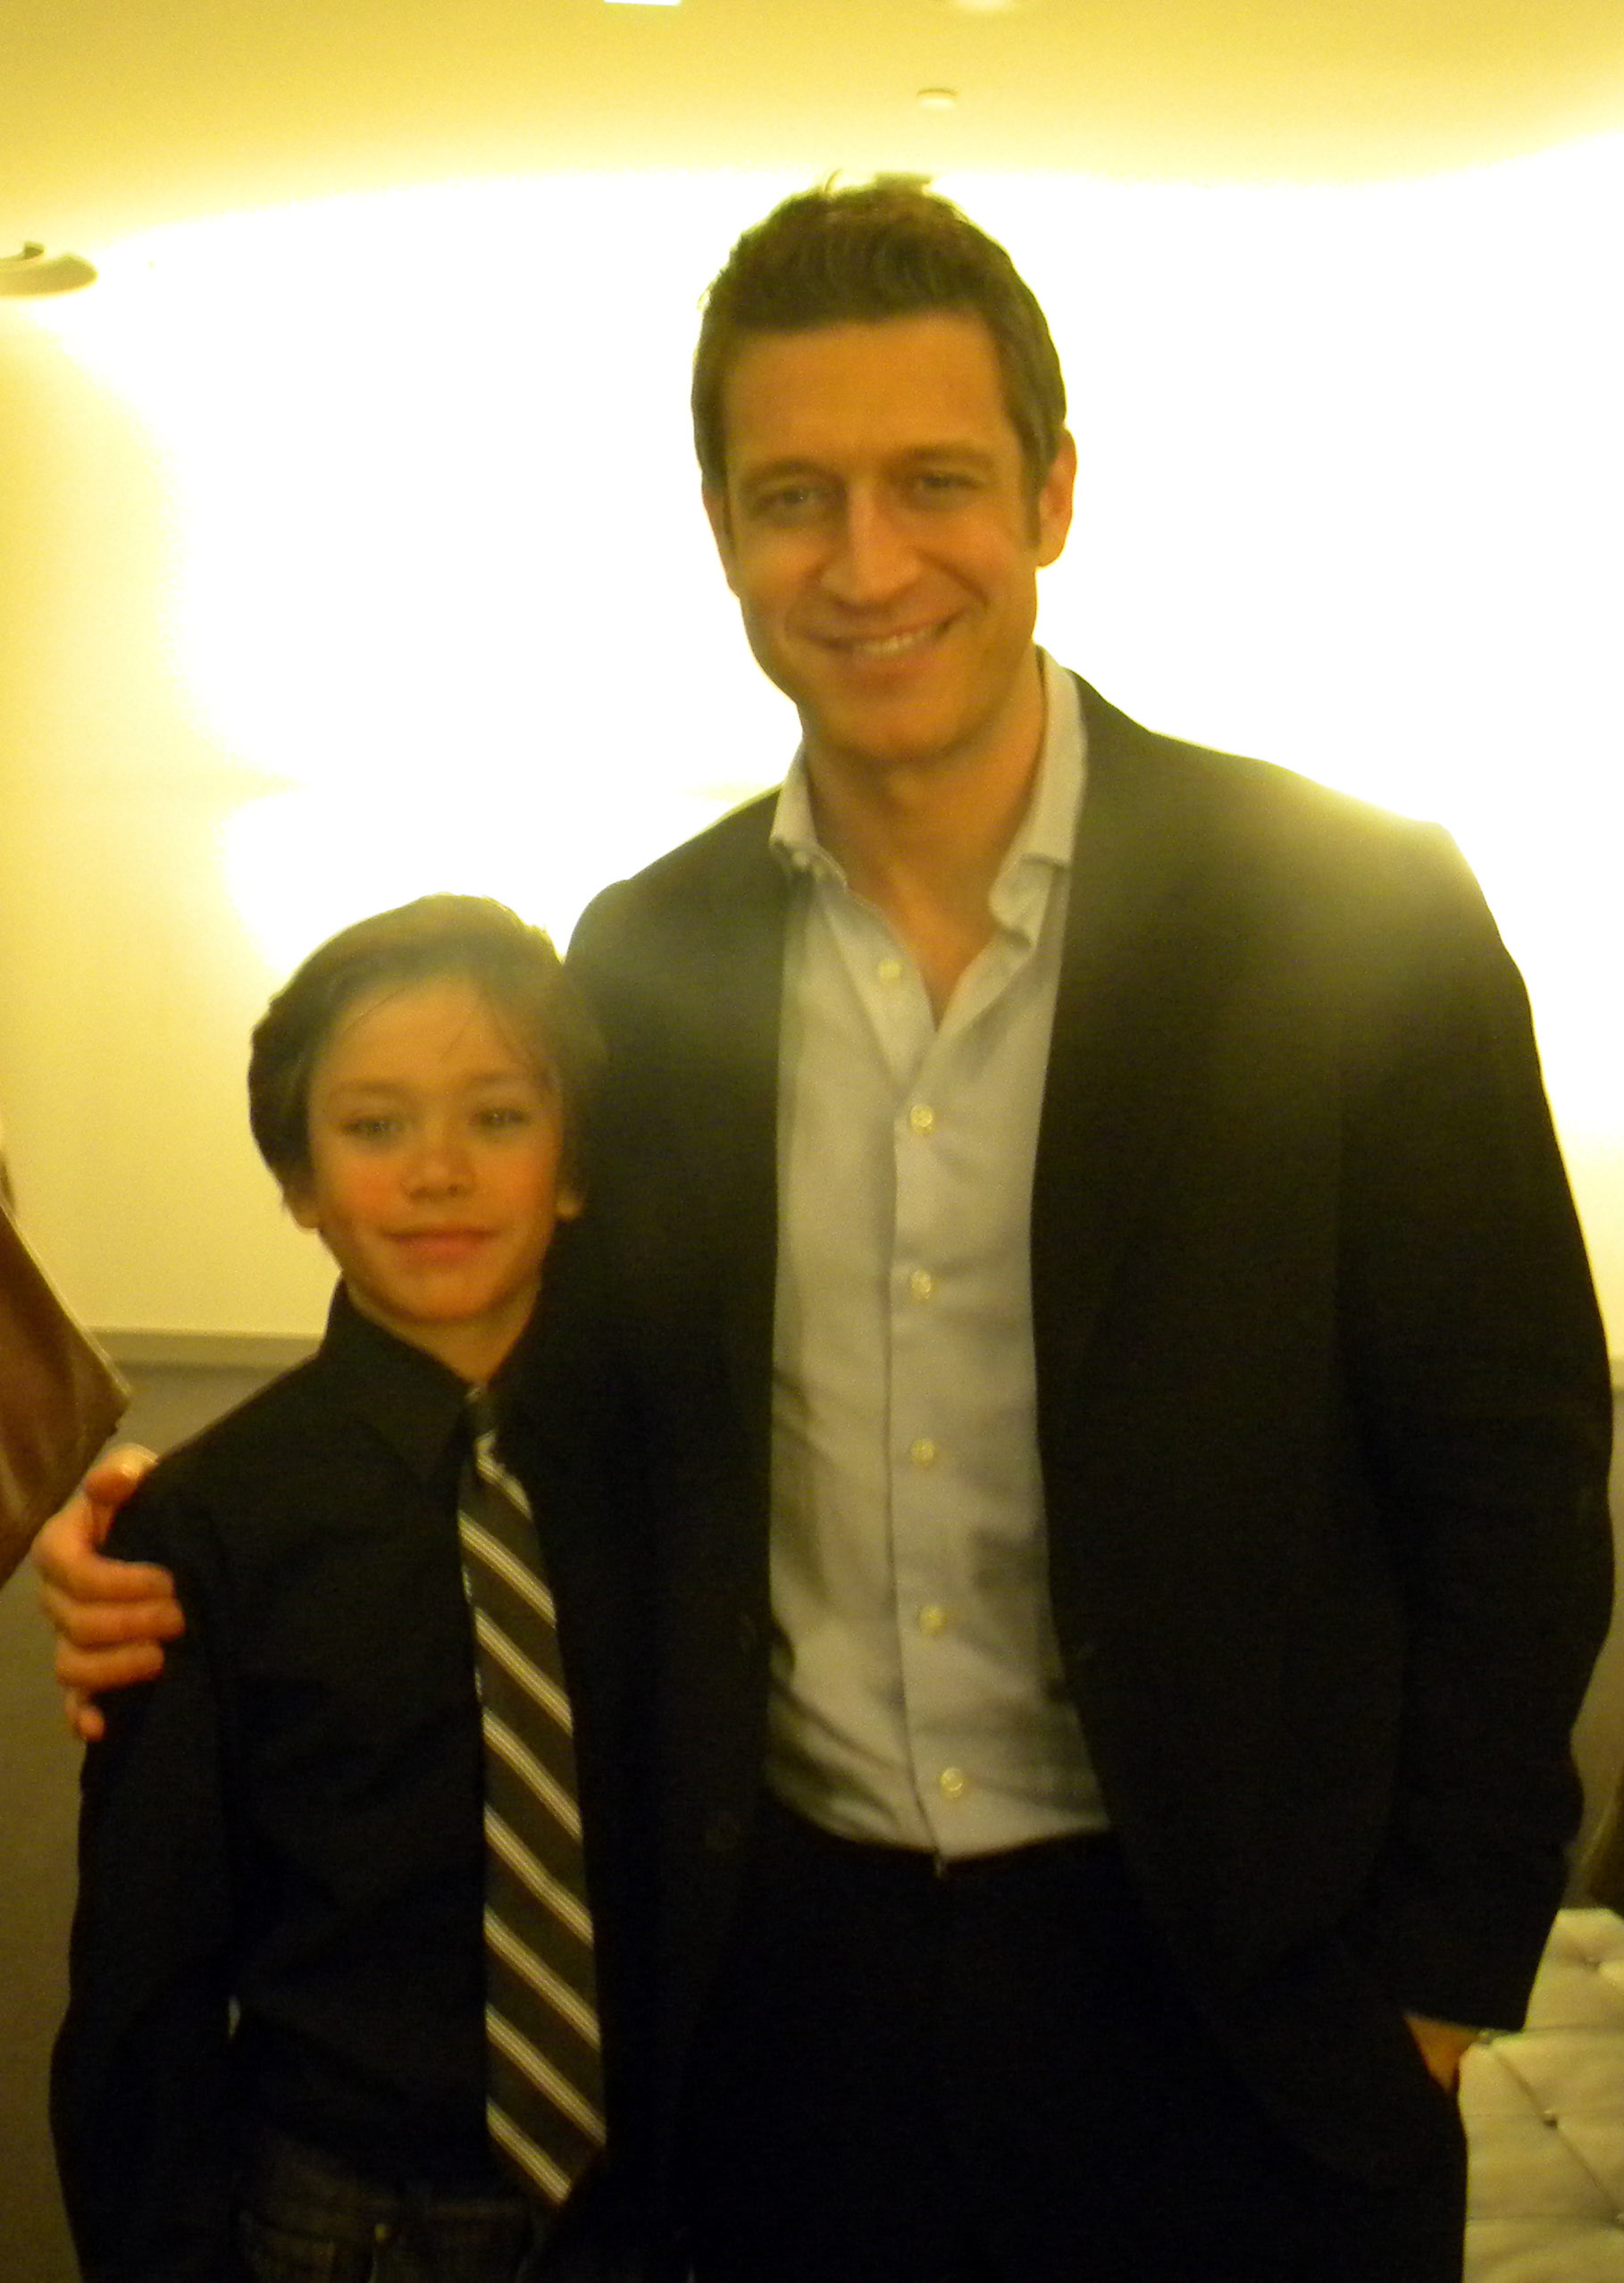 Christian and Robert Gant who played dad in 